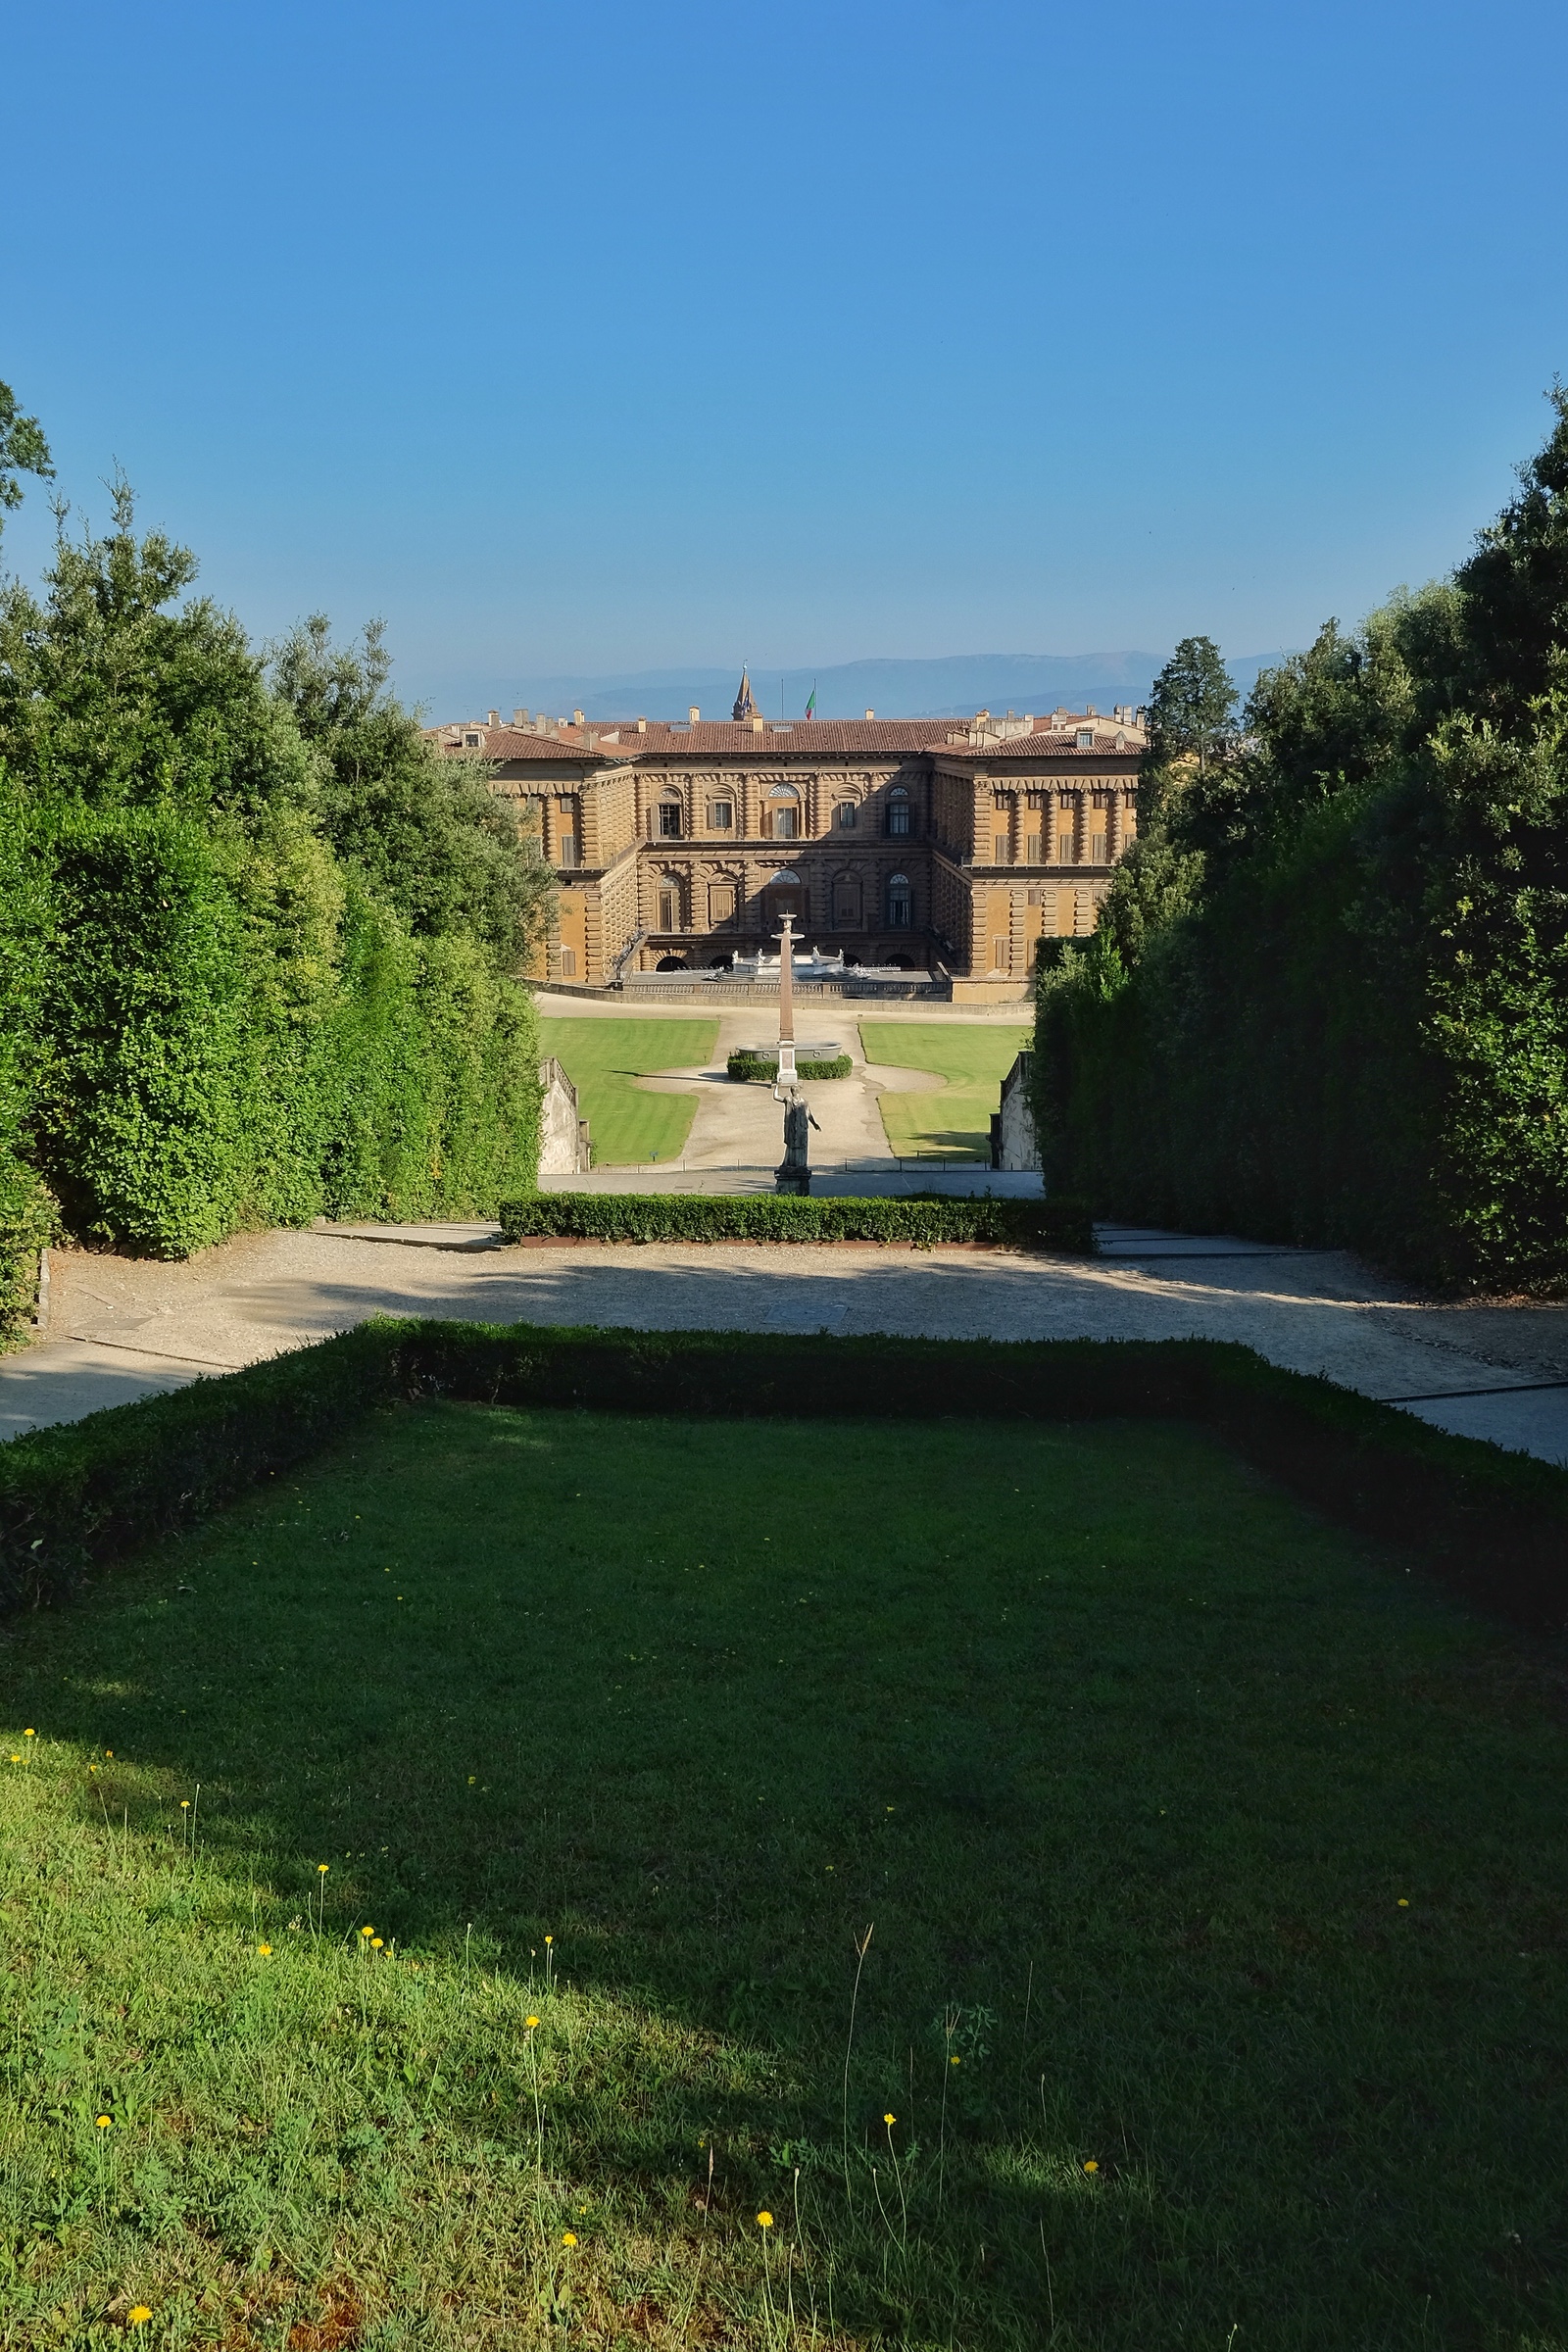 Looking towards the Pitti Palace from the gorgeous Boboli Gardens.